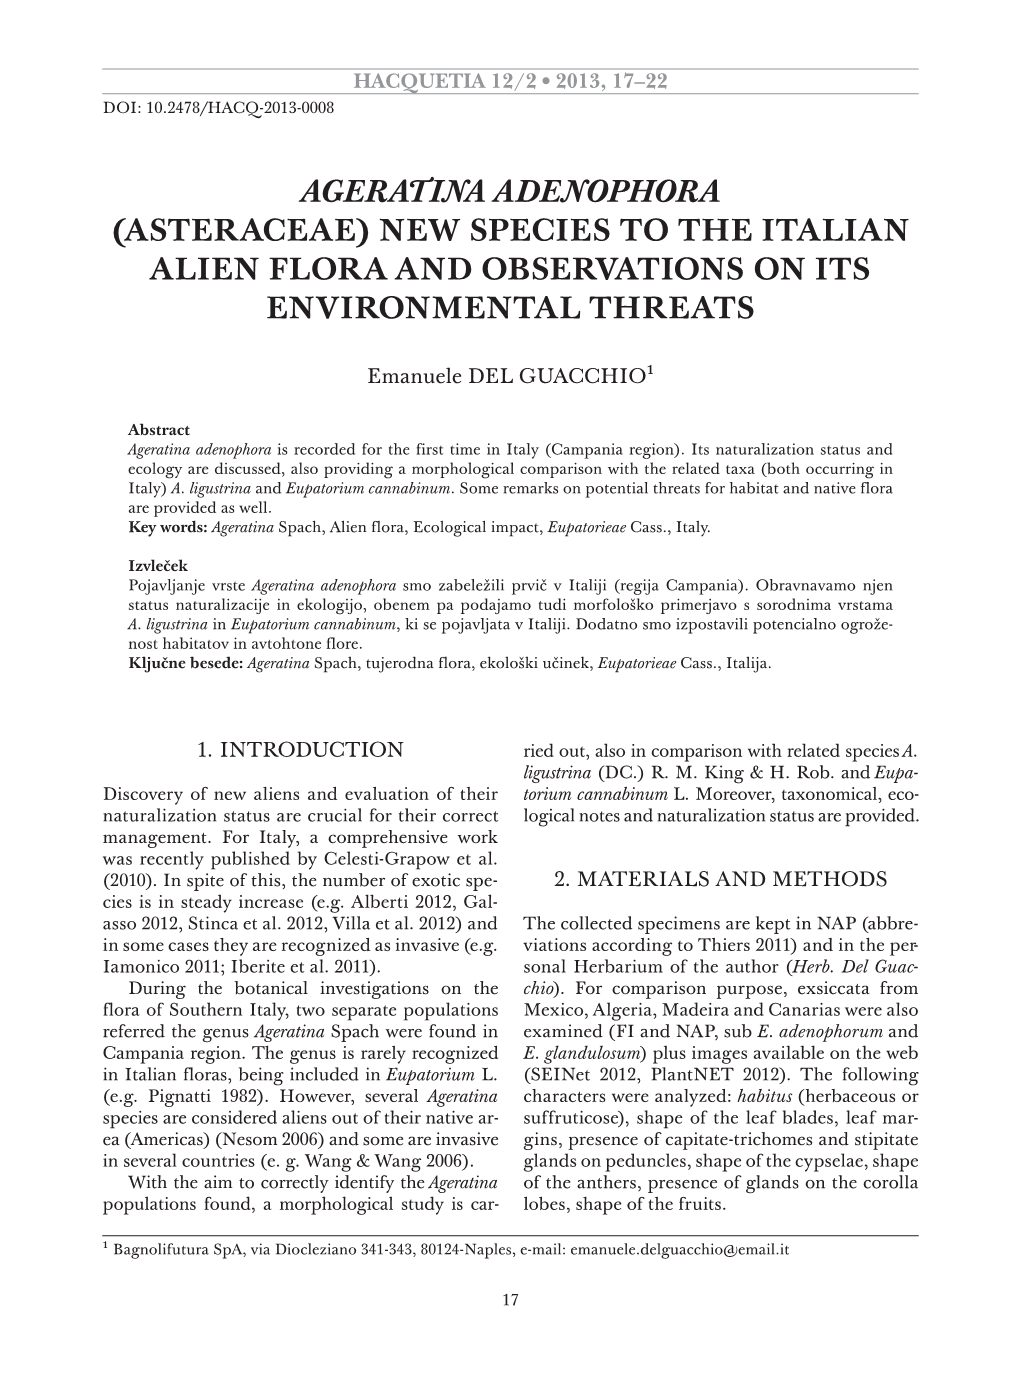 Ageratina Adenophora Is Recorded for the First Time in Italy (Campania Region)